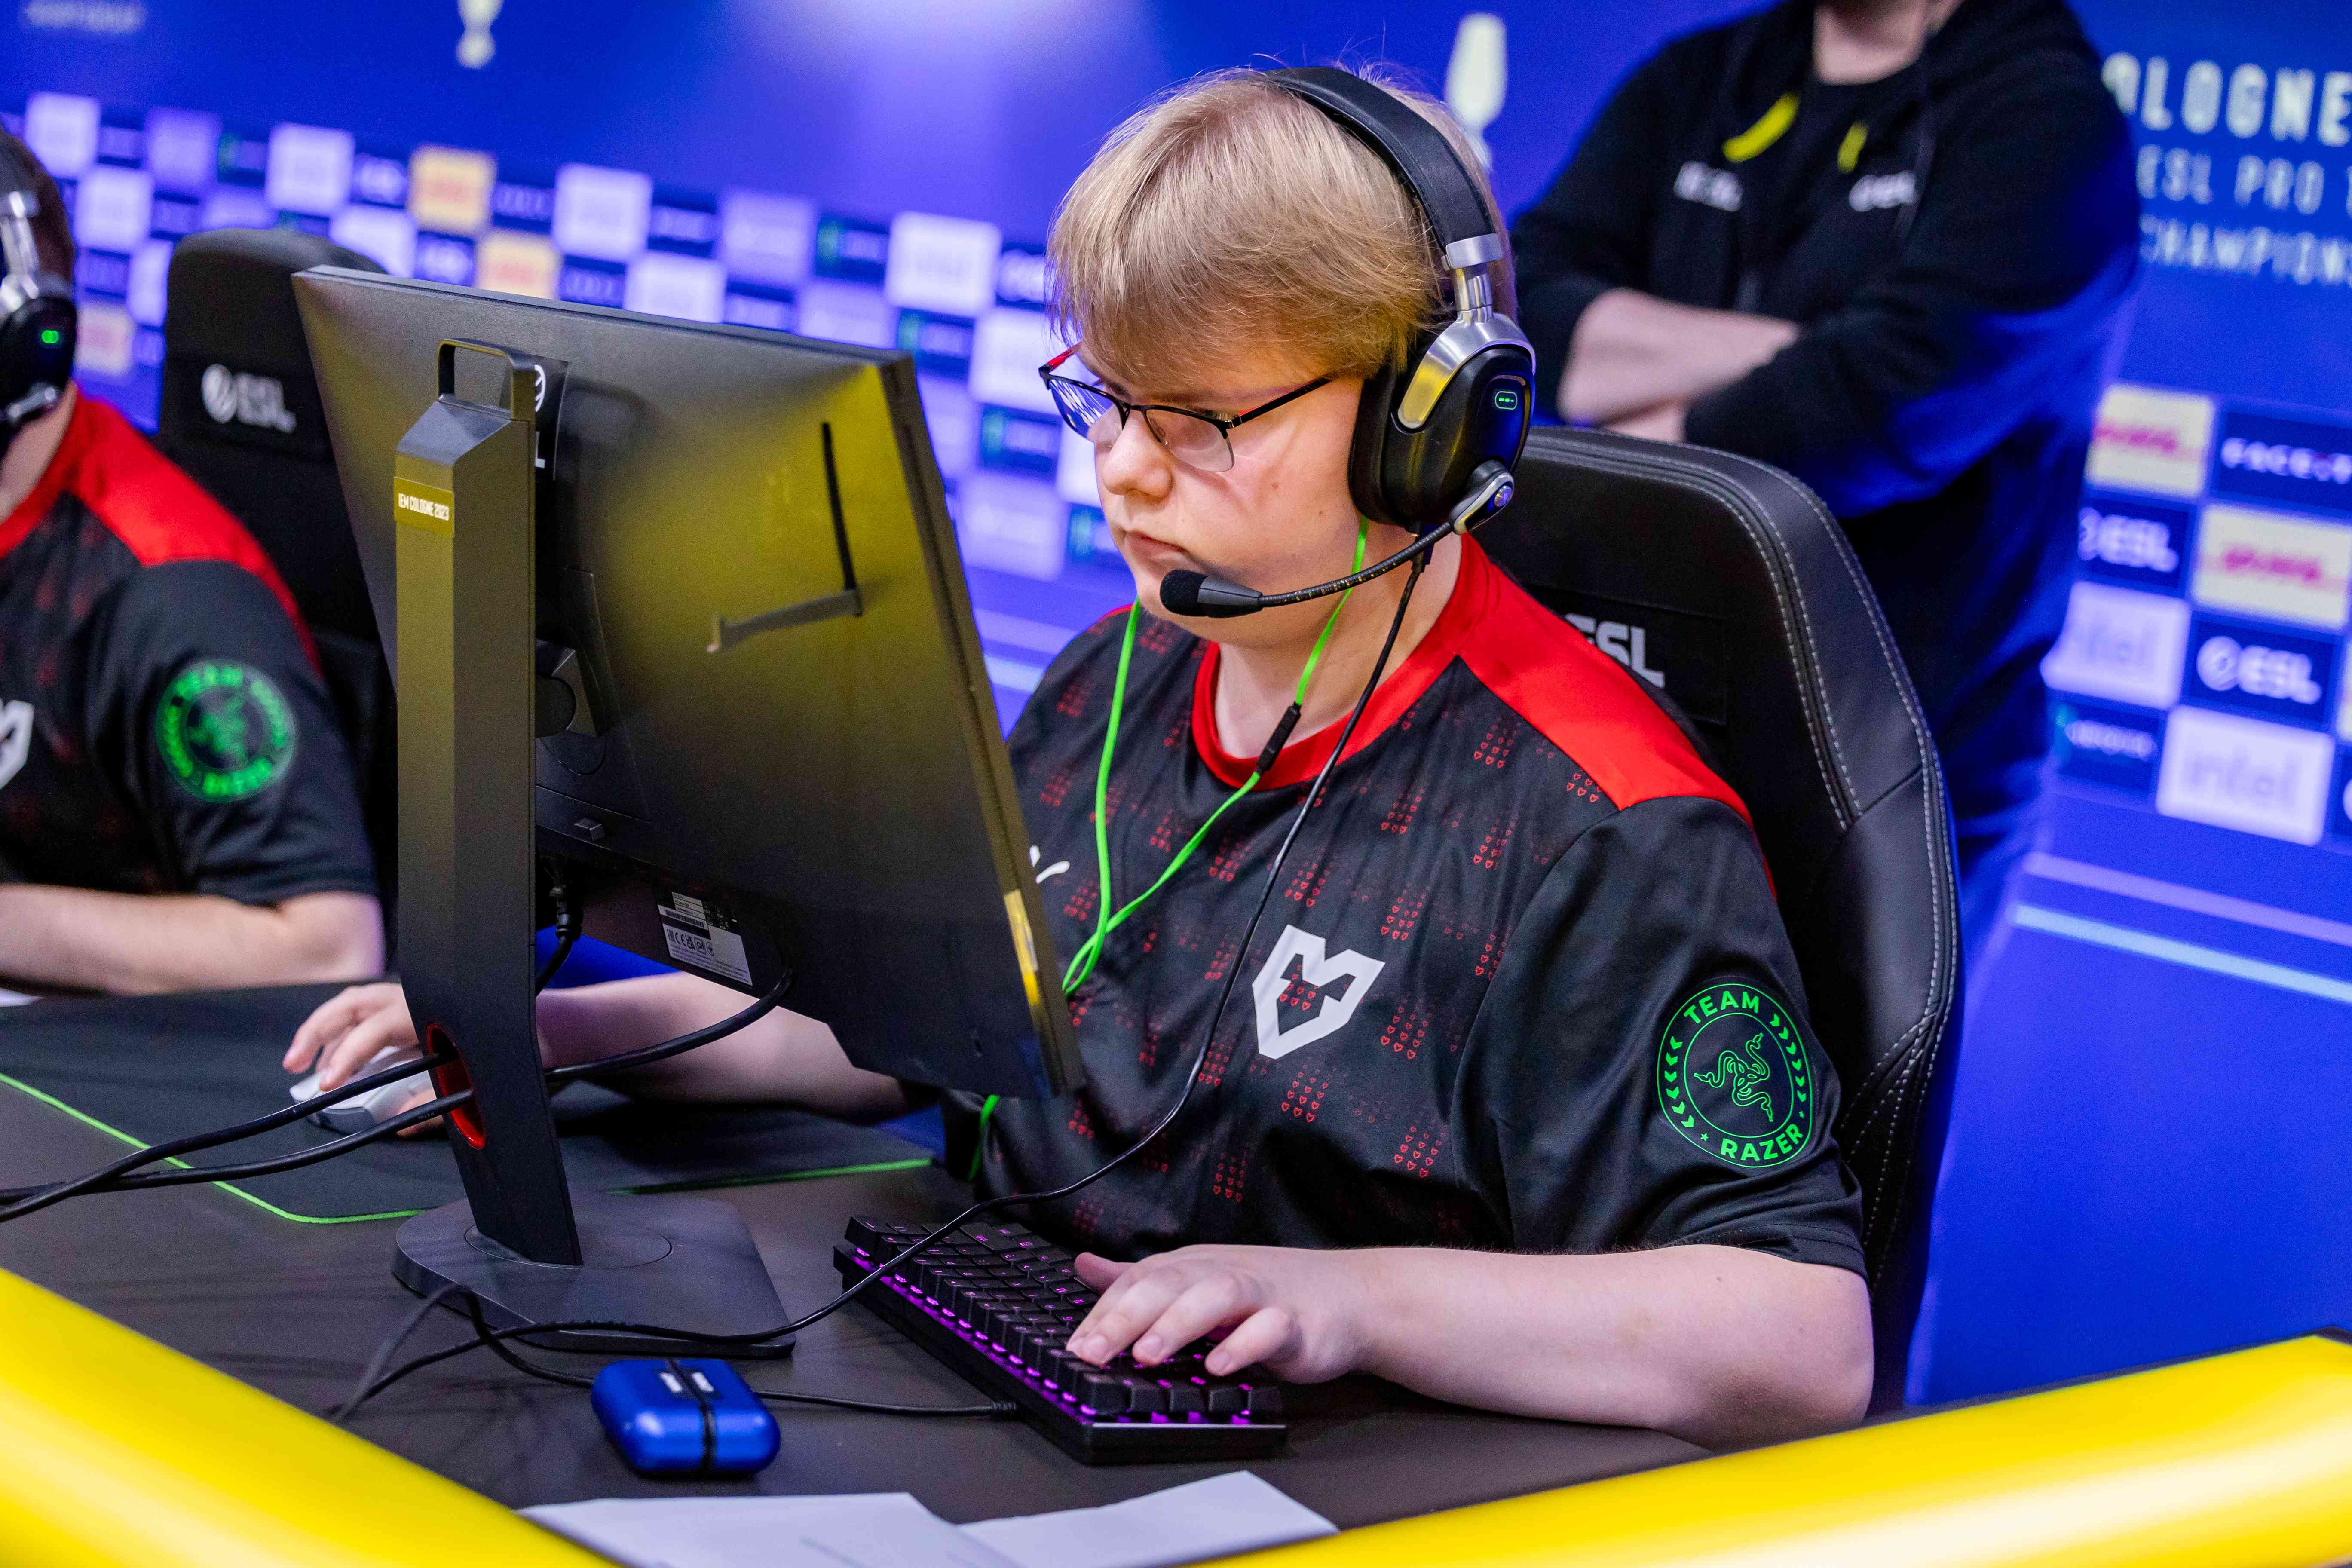 16-year-old Jimpphat stumbled in his first Big Event appearance (Image Credits: ESL, Stephanie Lindgren)